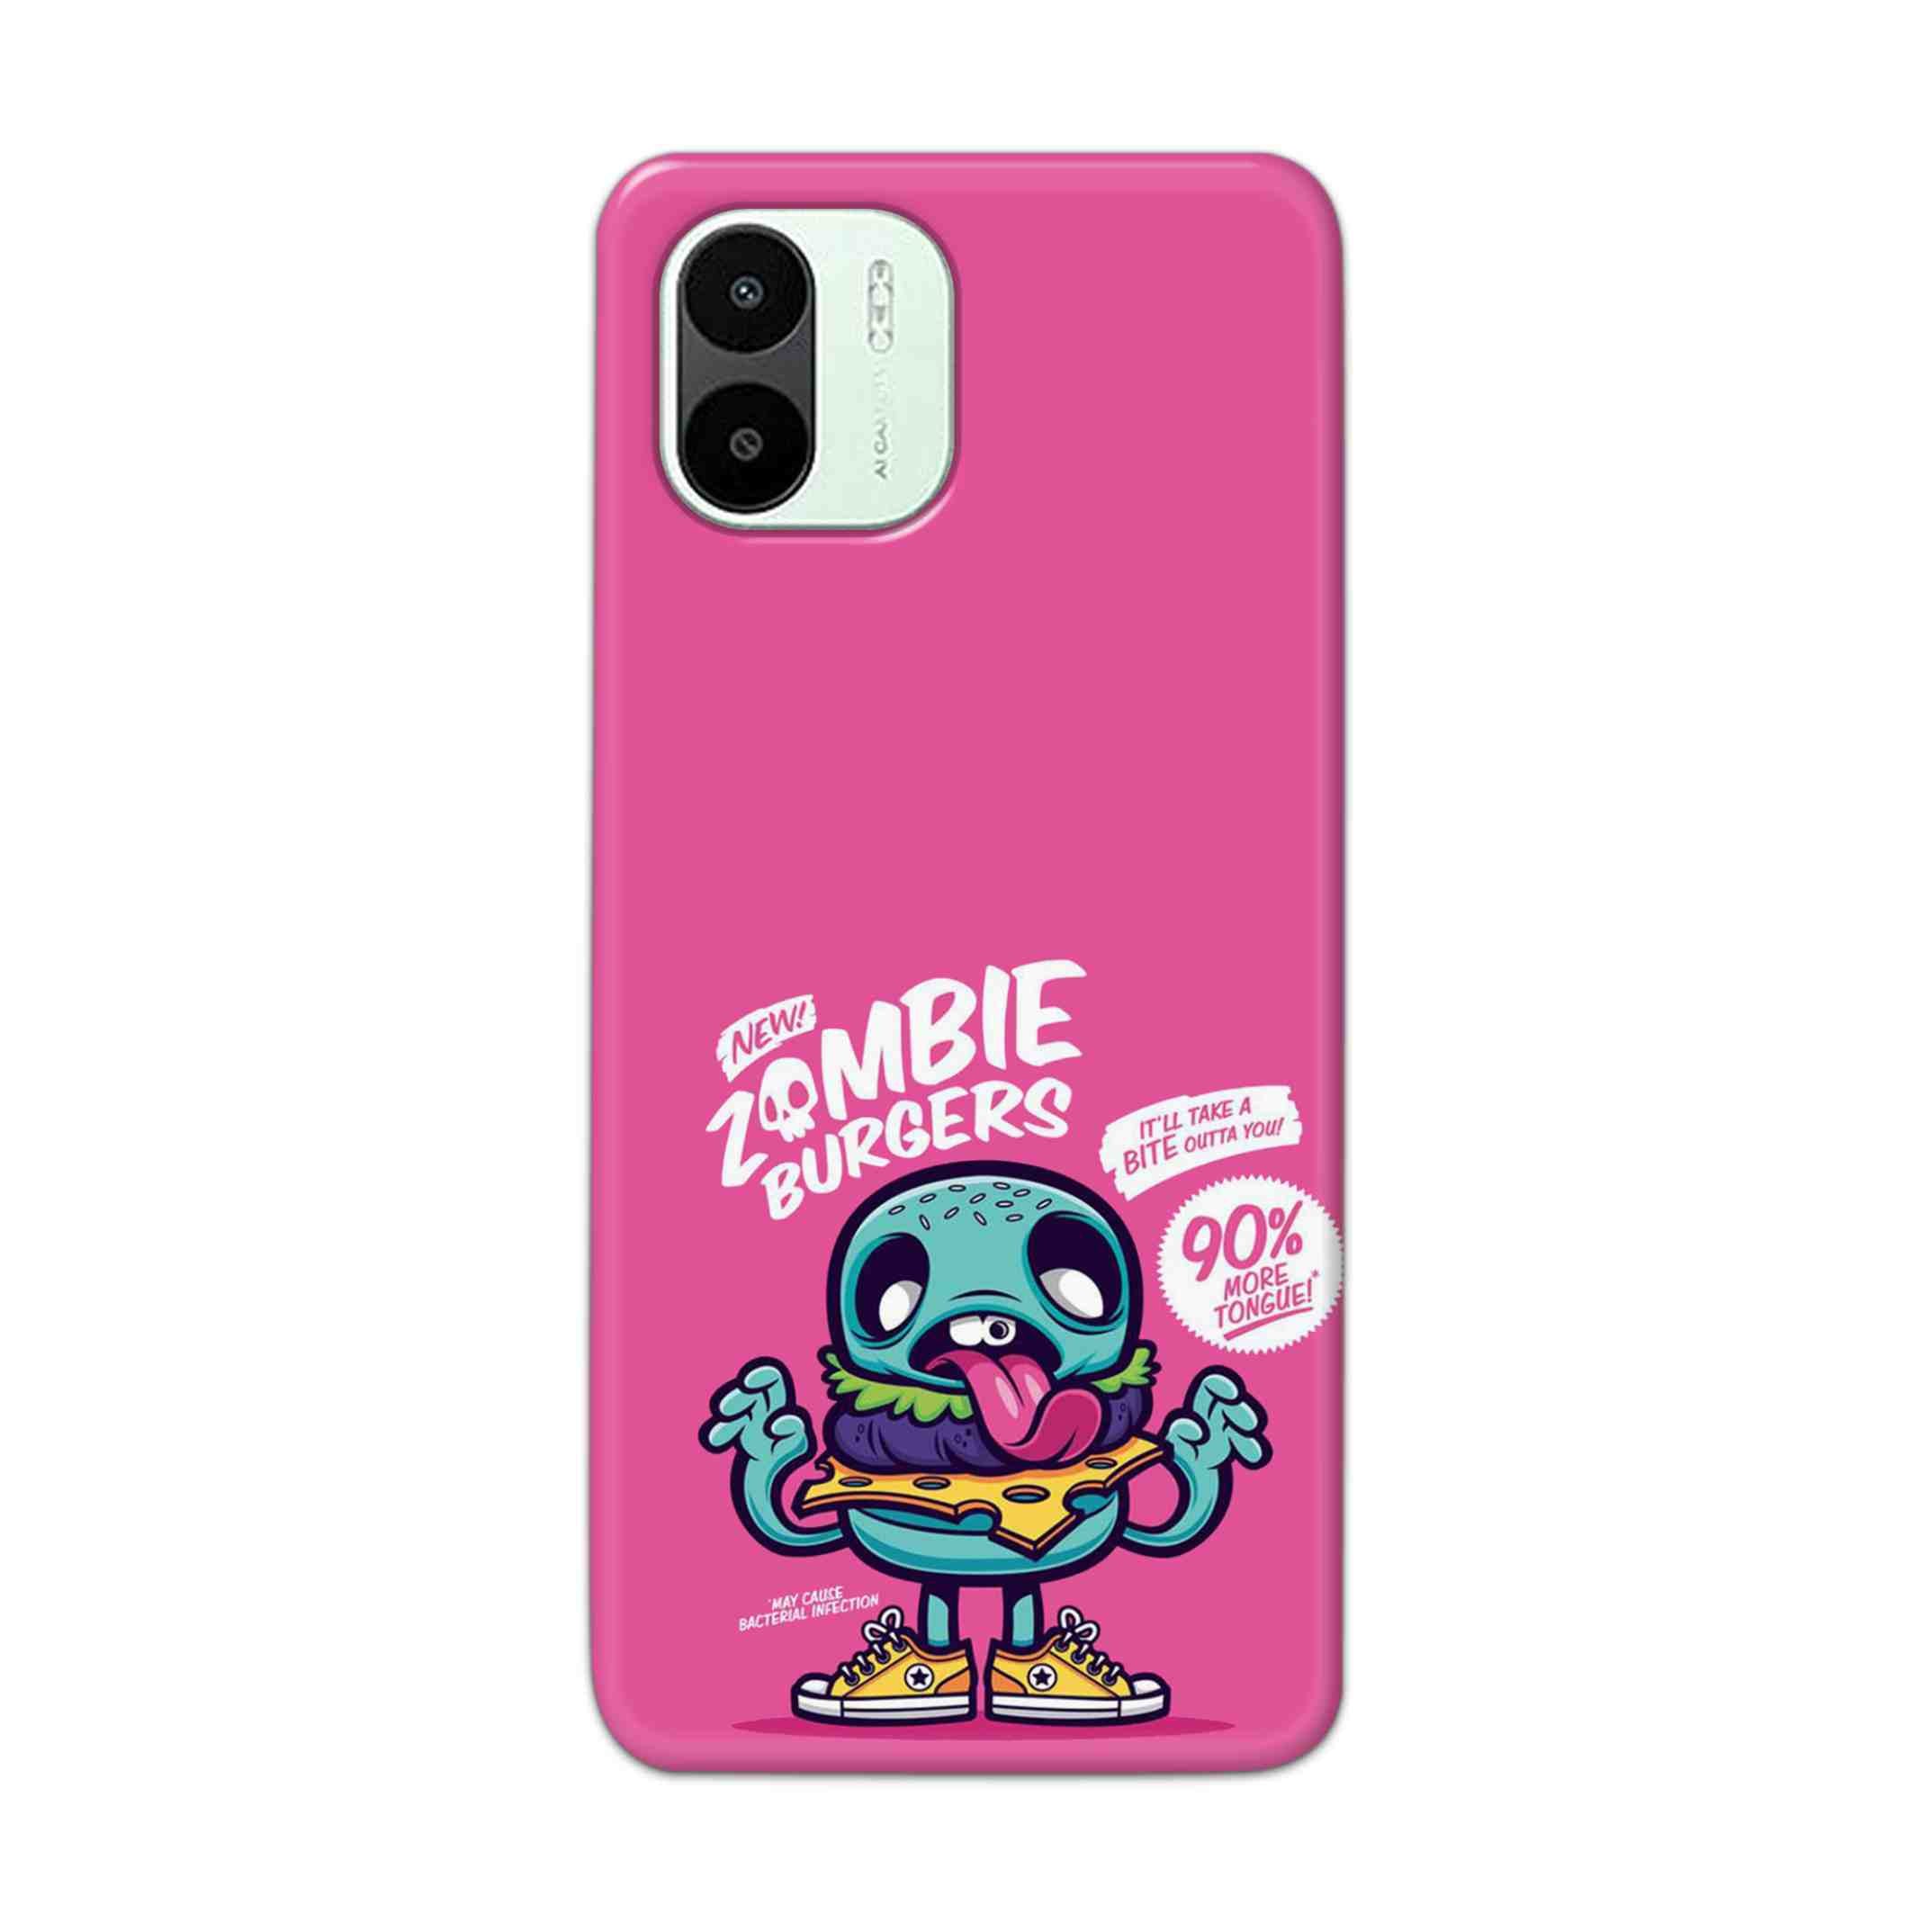 Buy New Zombie Burgers Hard Back Mobile Phone Case Cover For Xiaomi Redmi A1 5G Online